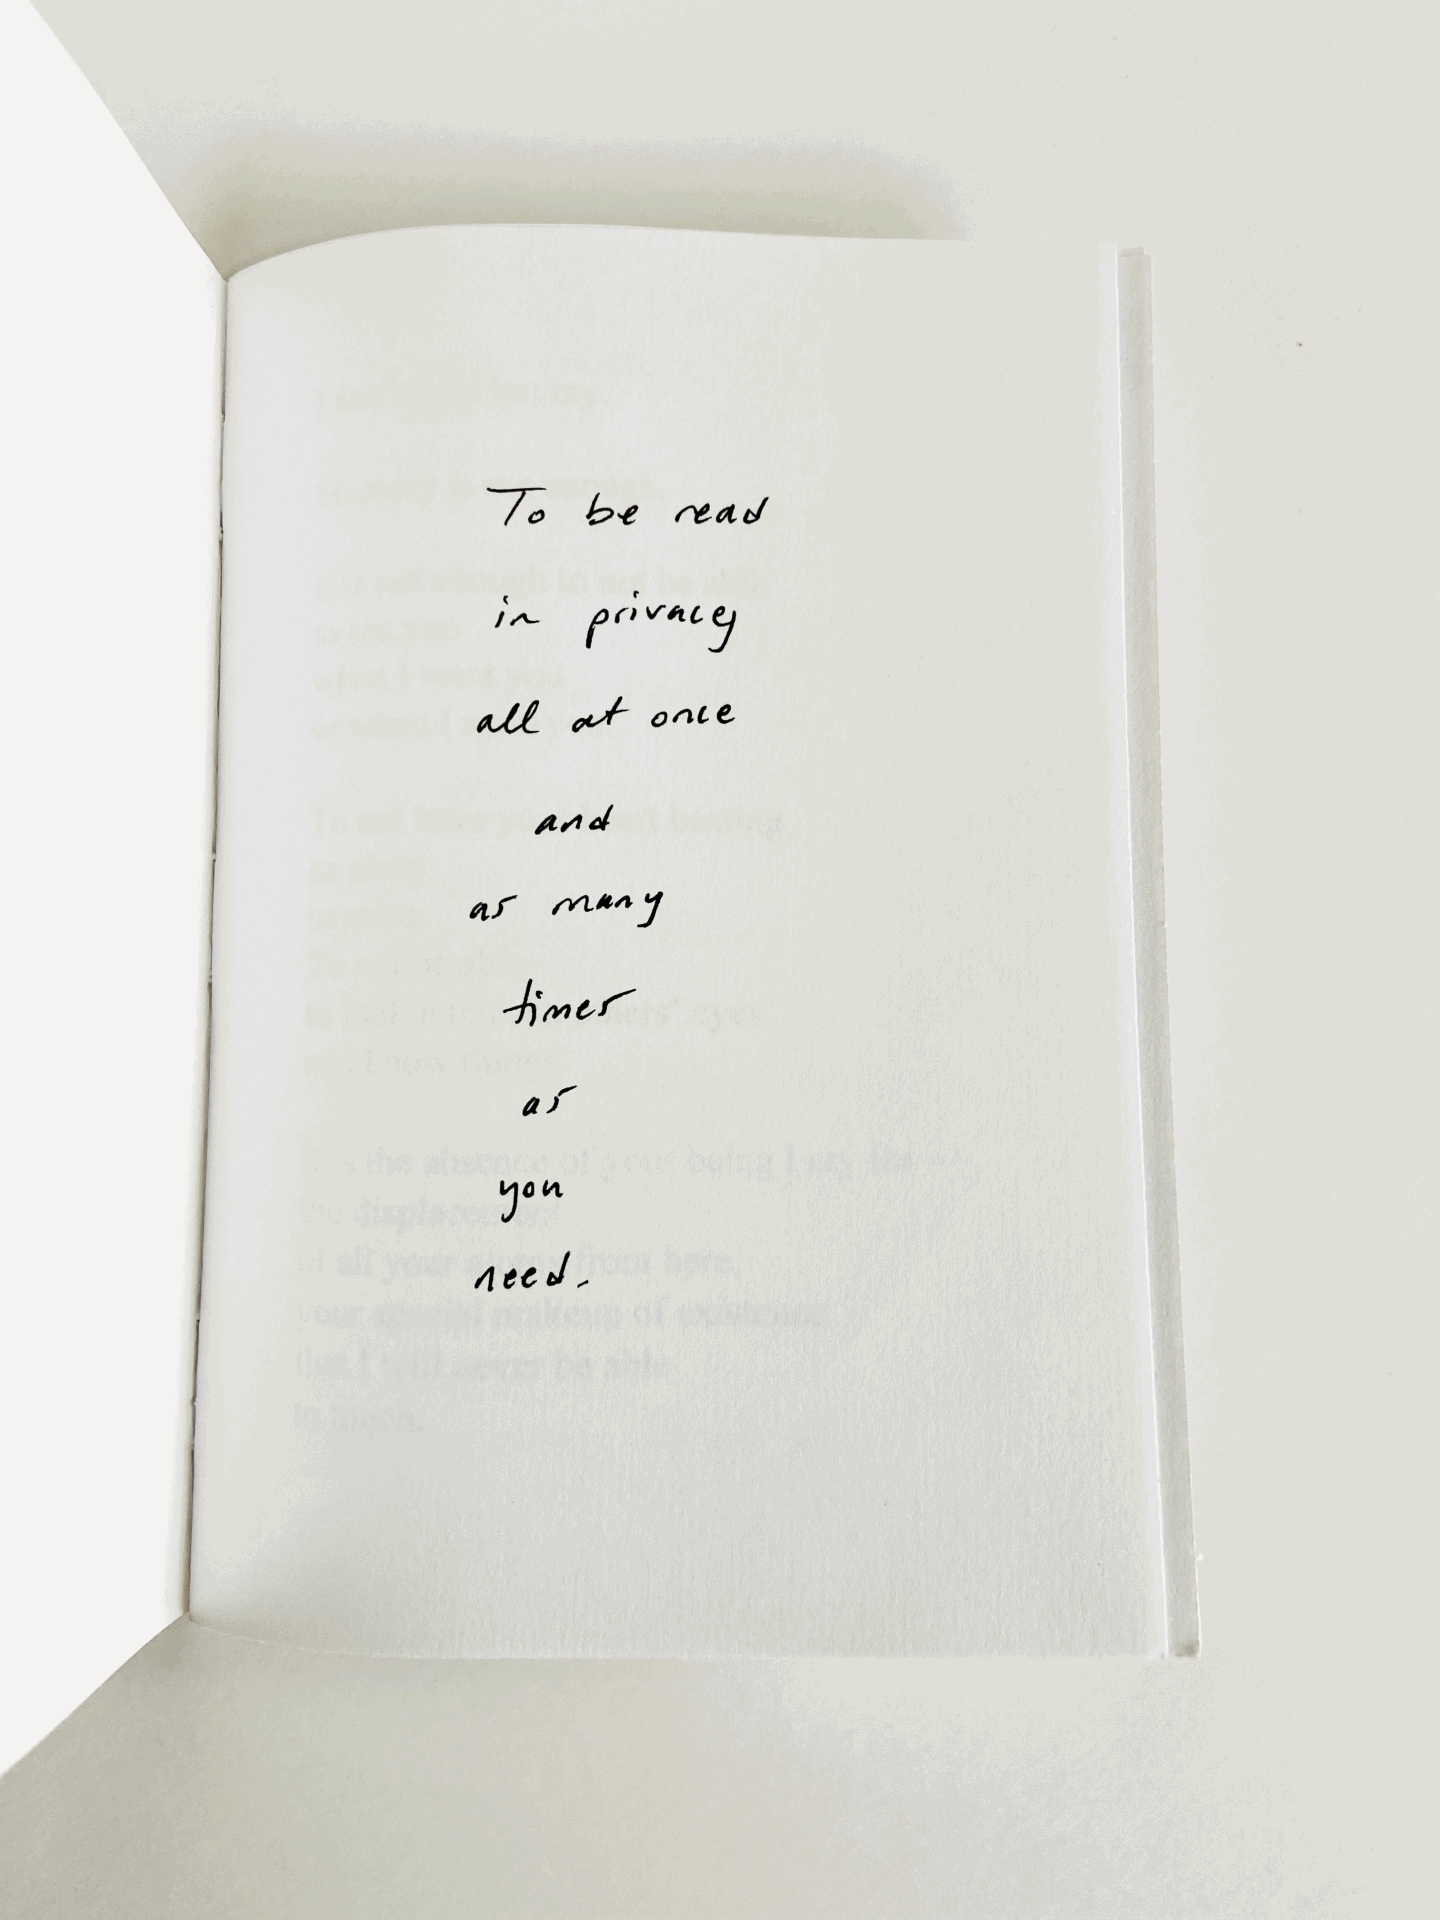 'Release' Poetry Book - 'words on loss & love'